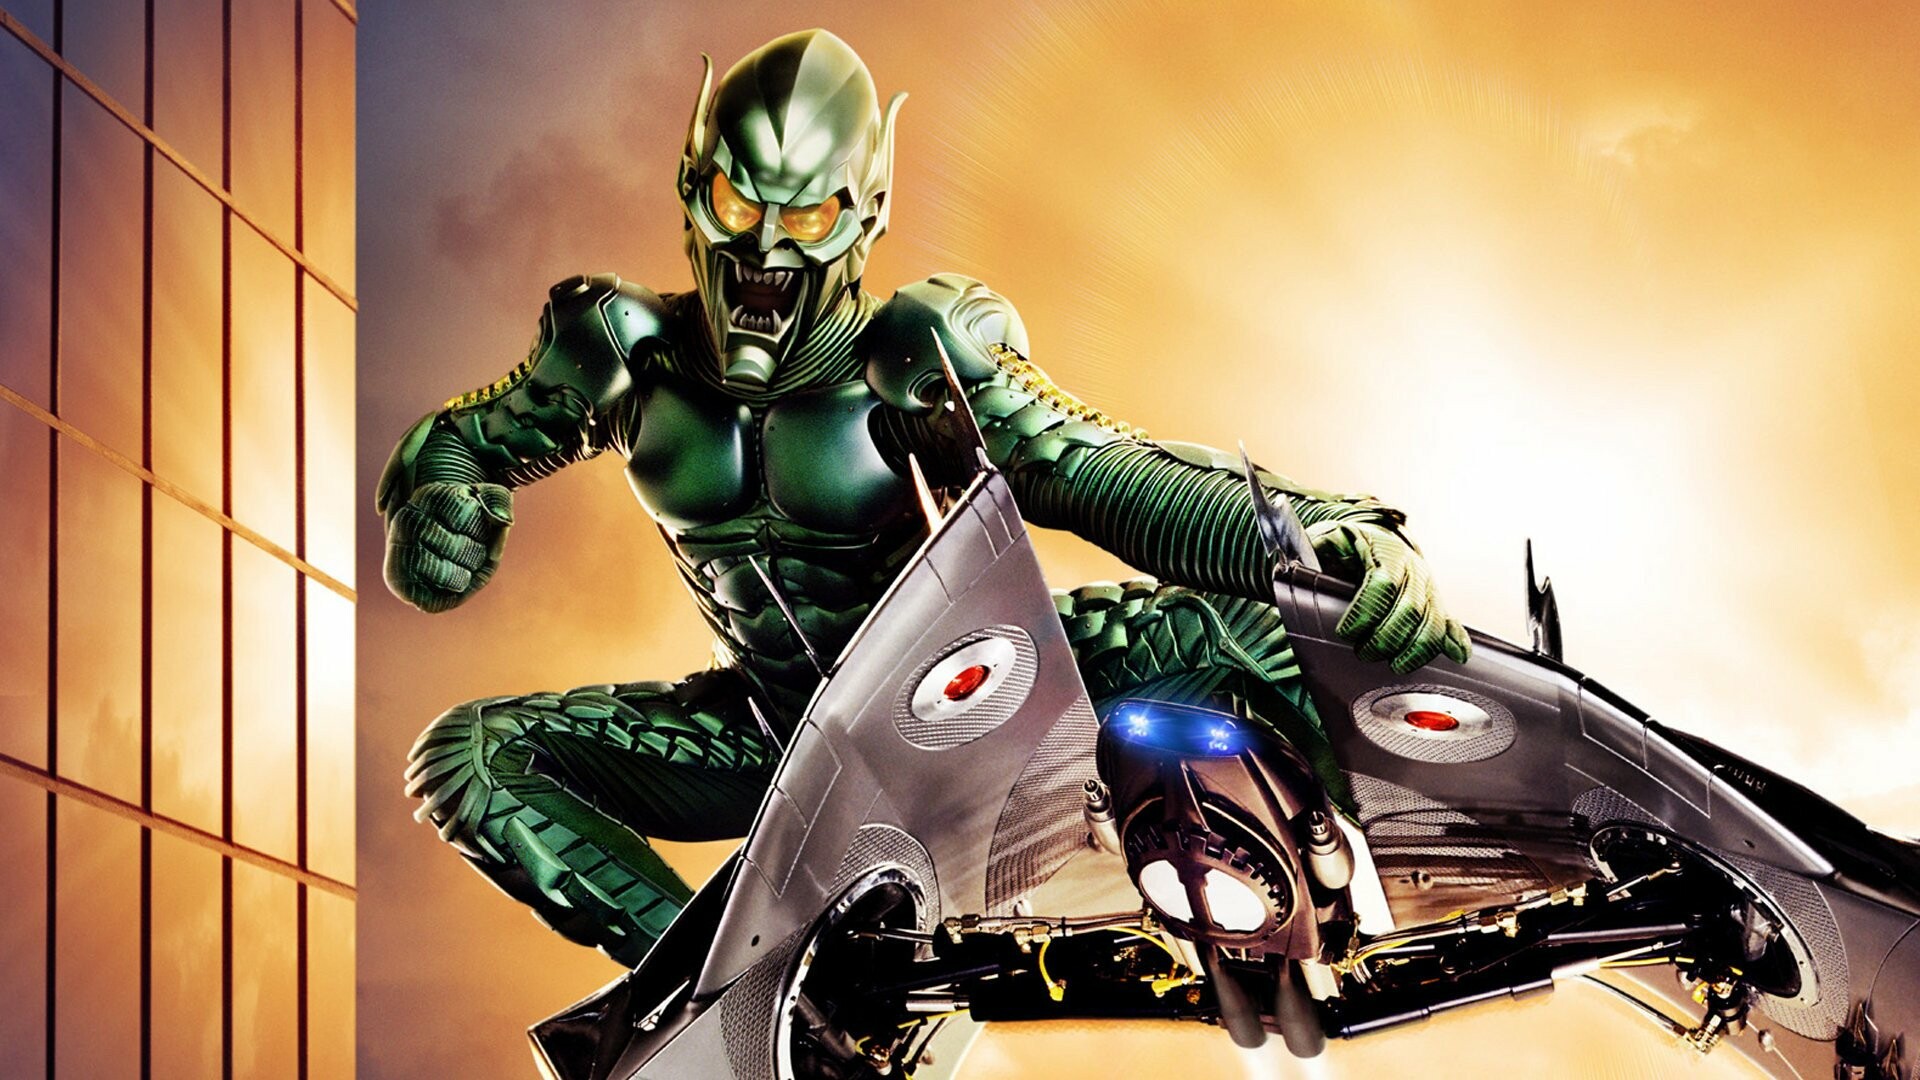 Green Goblin: A cunning and dangerous villain, The first great enemy of Spider-Man. 1920x1080 Full HD Background.